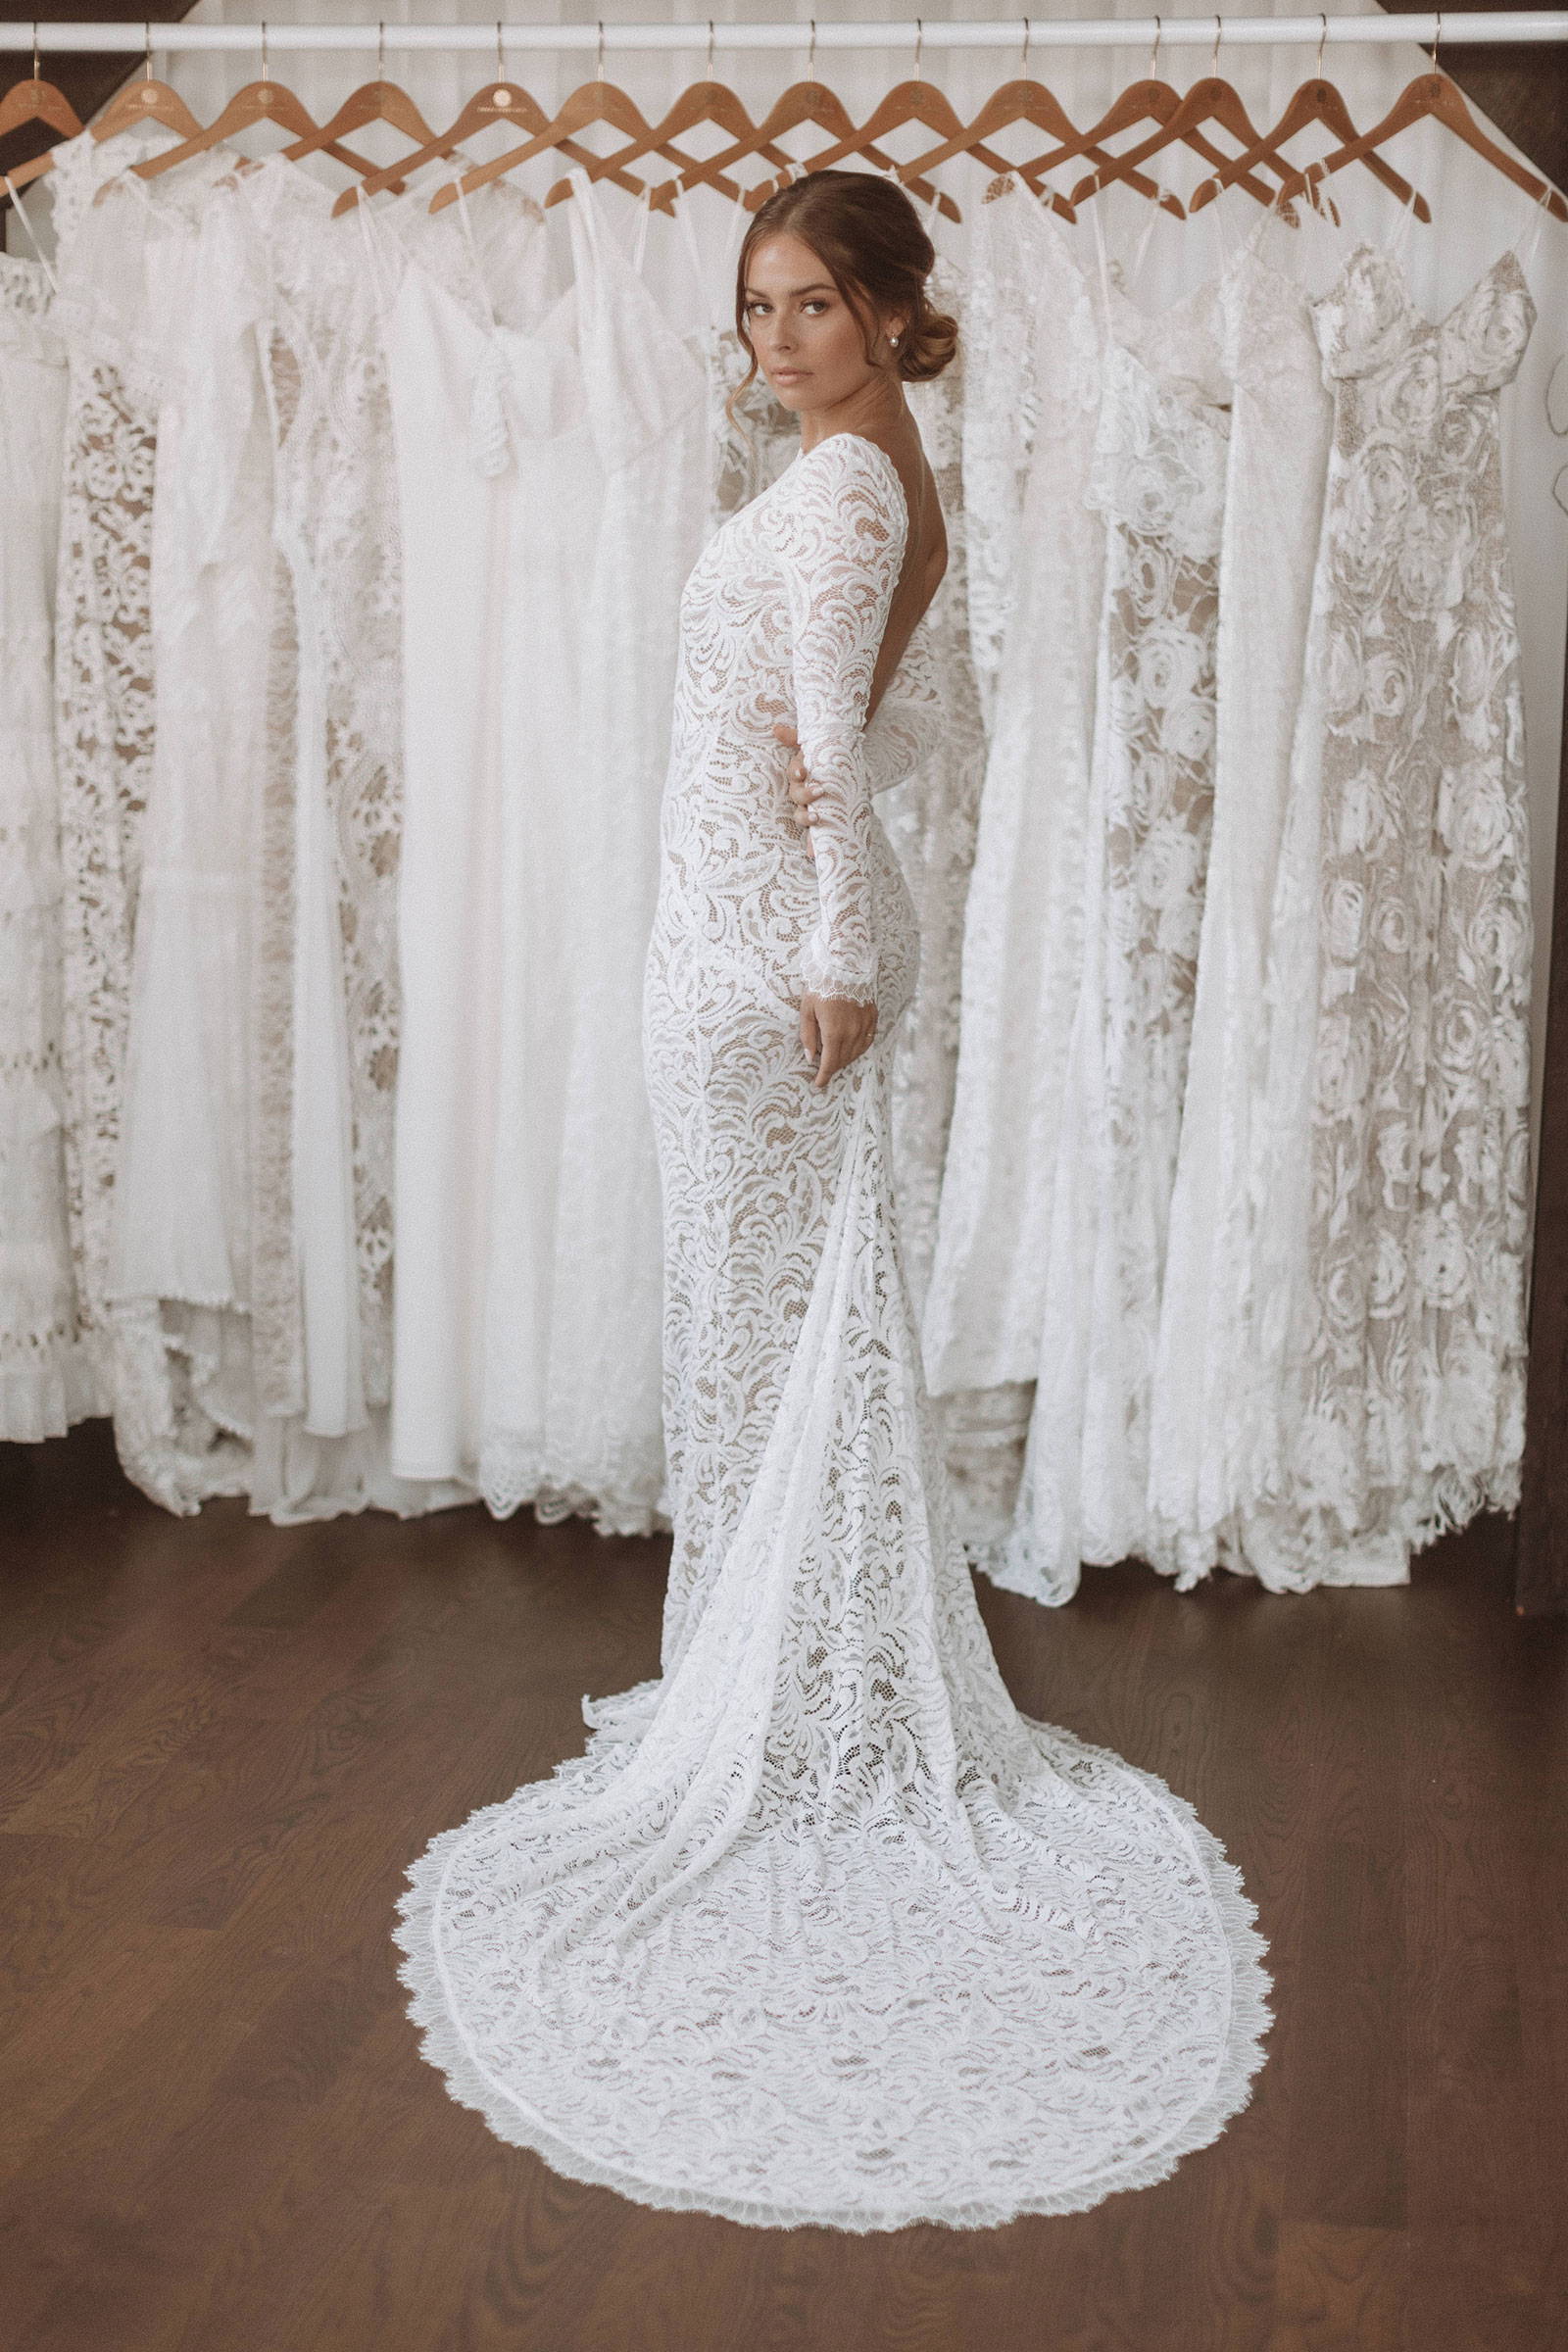 Women wearing the Grace Loves Lace Orla gown with backdrop of Grace Loves Lace hanging gowns